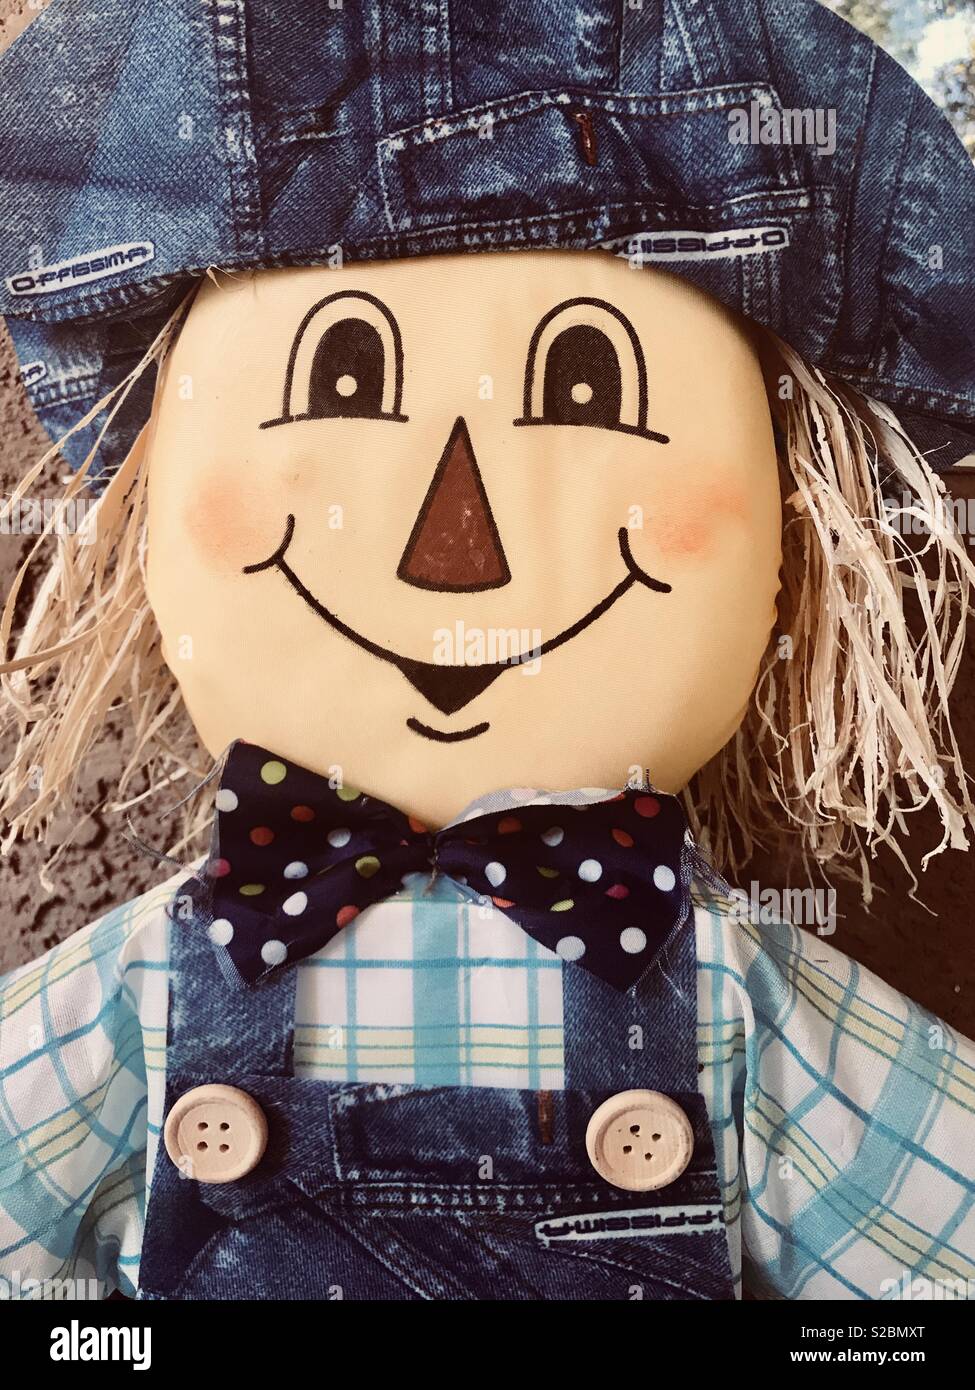 Scarecrow on display- straw hair, jean overalls a big grin and a bow tie Stock Photo